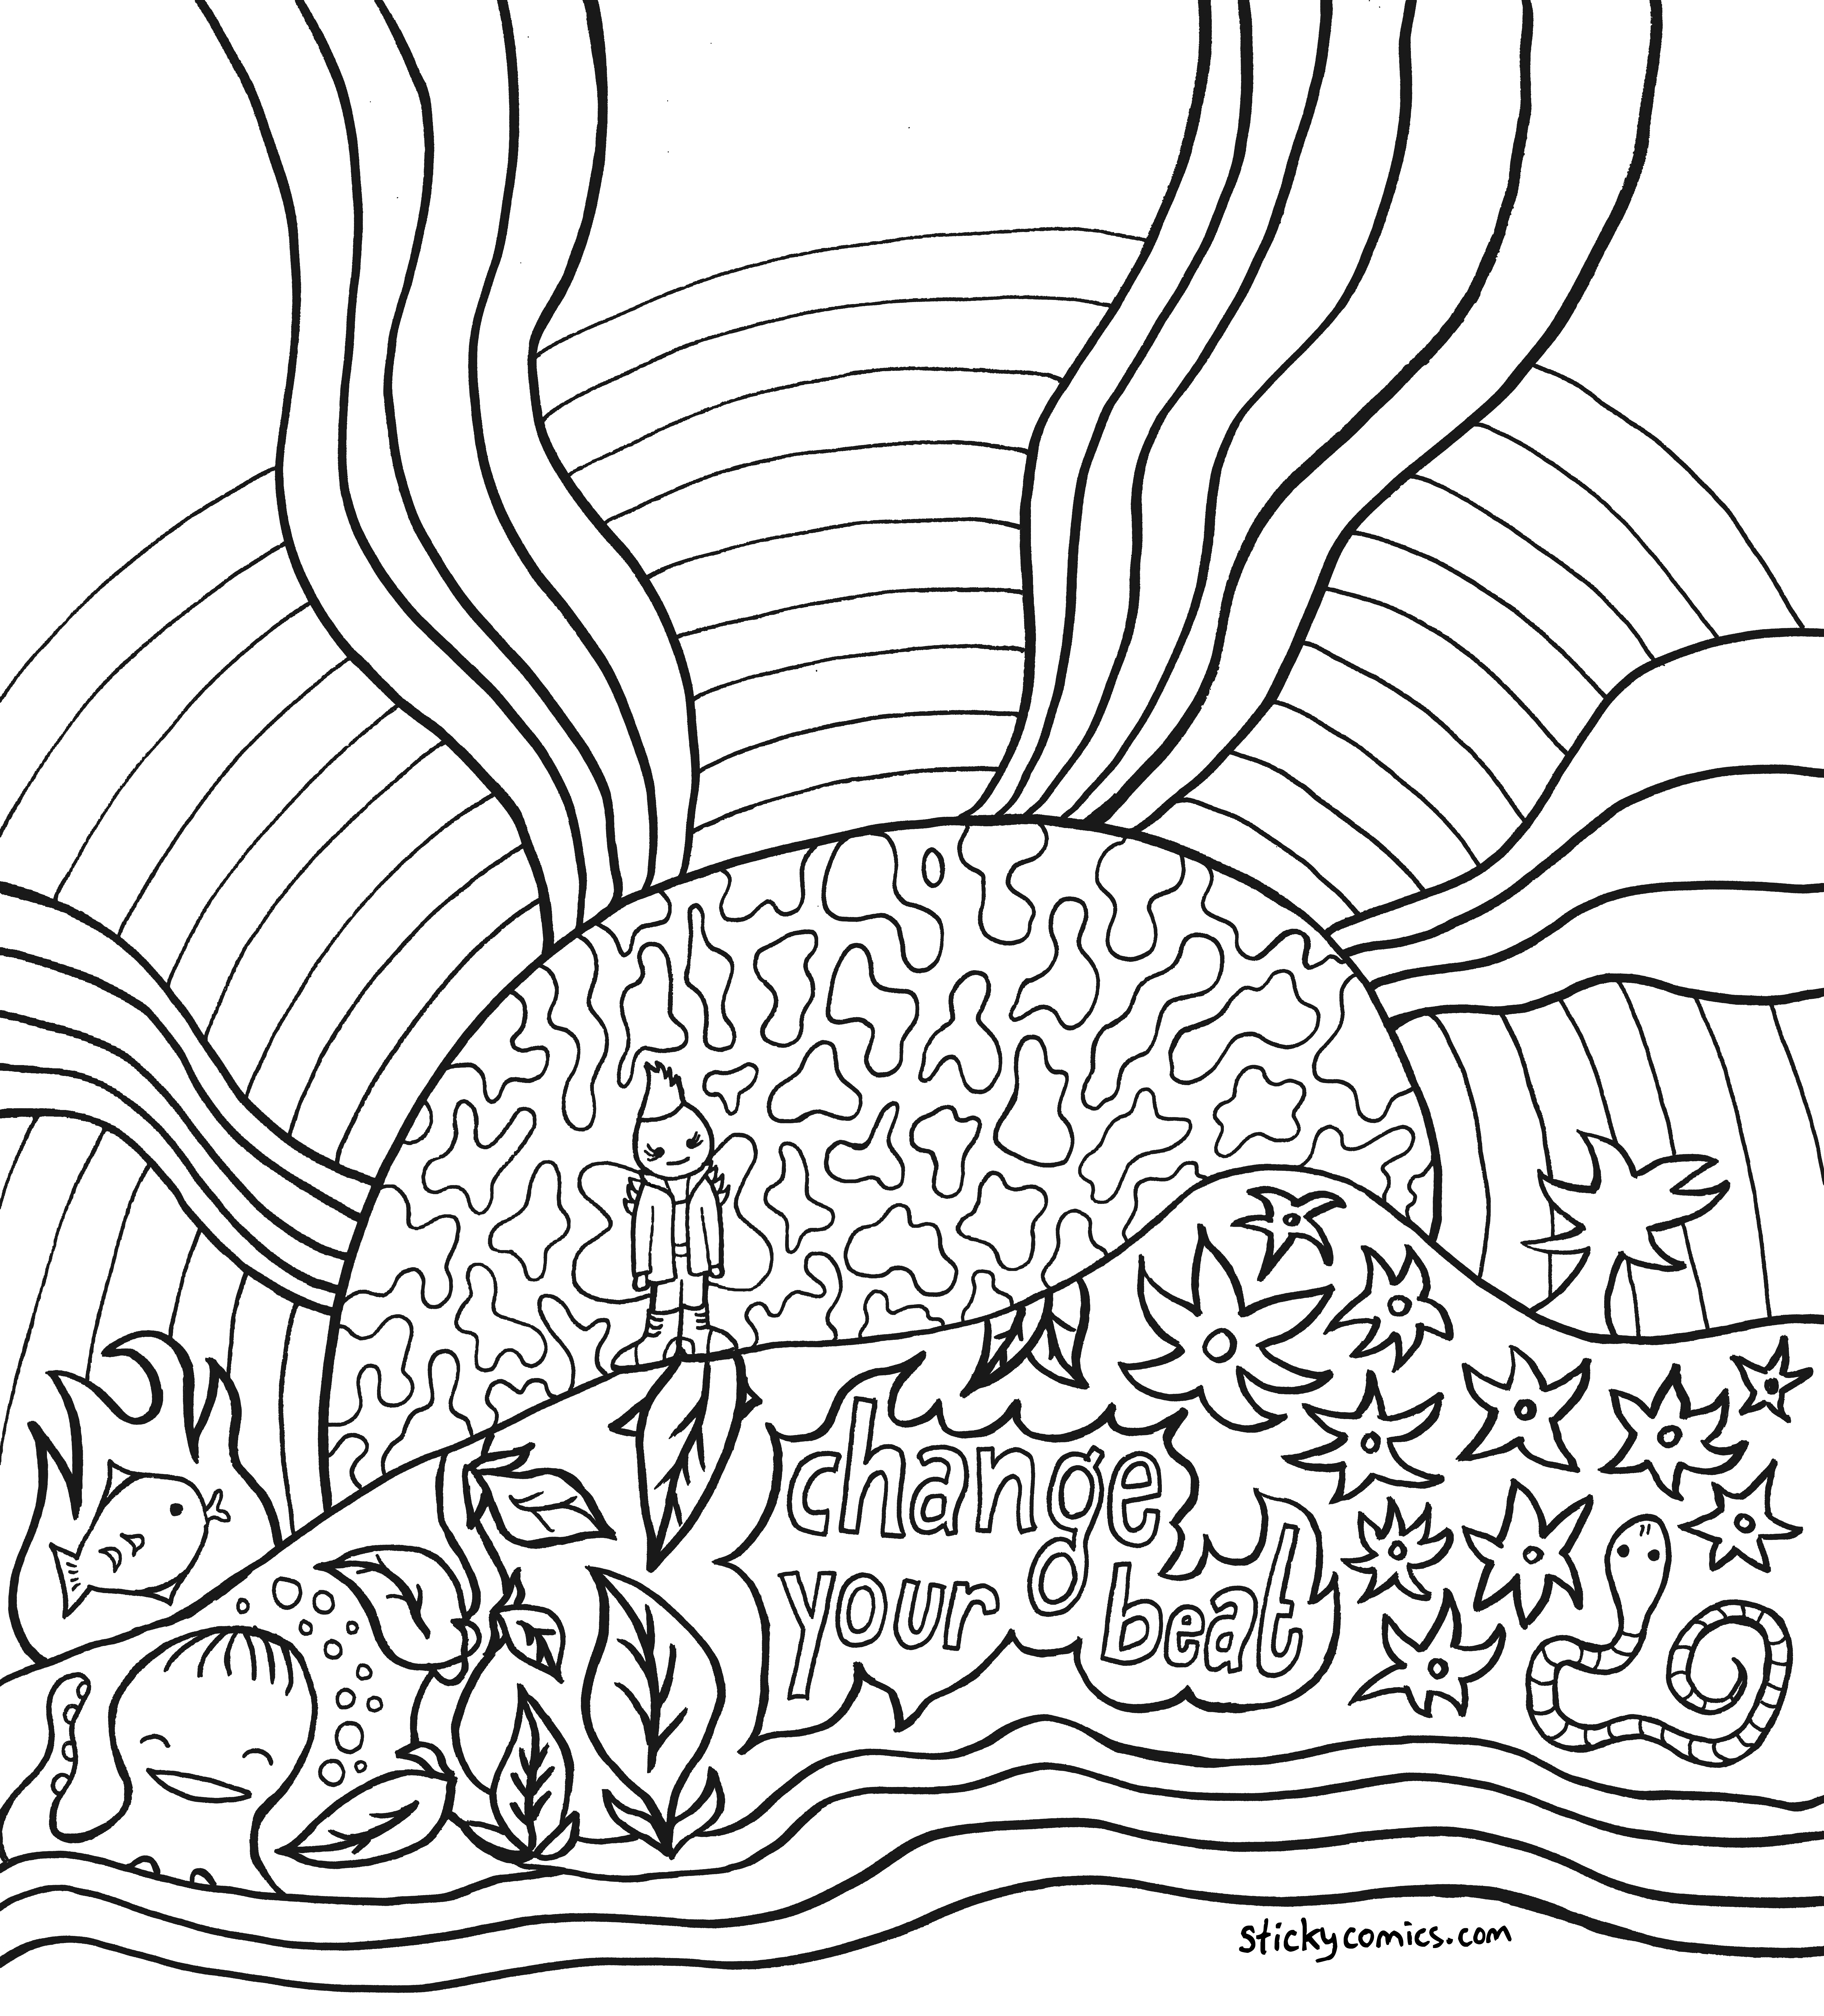 Change Your Beat Coloring Page Sticky Comics